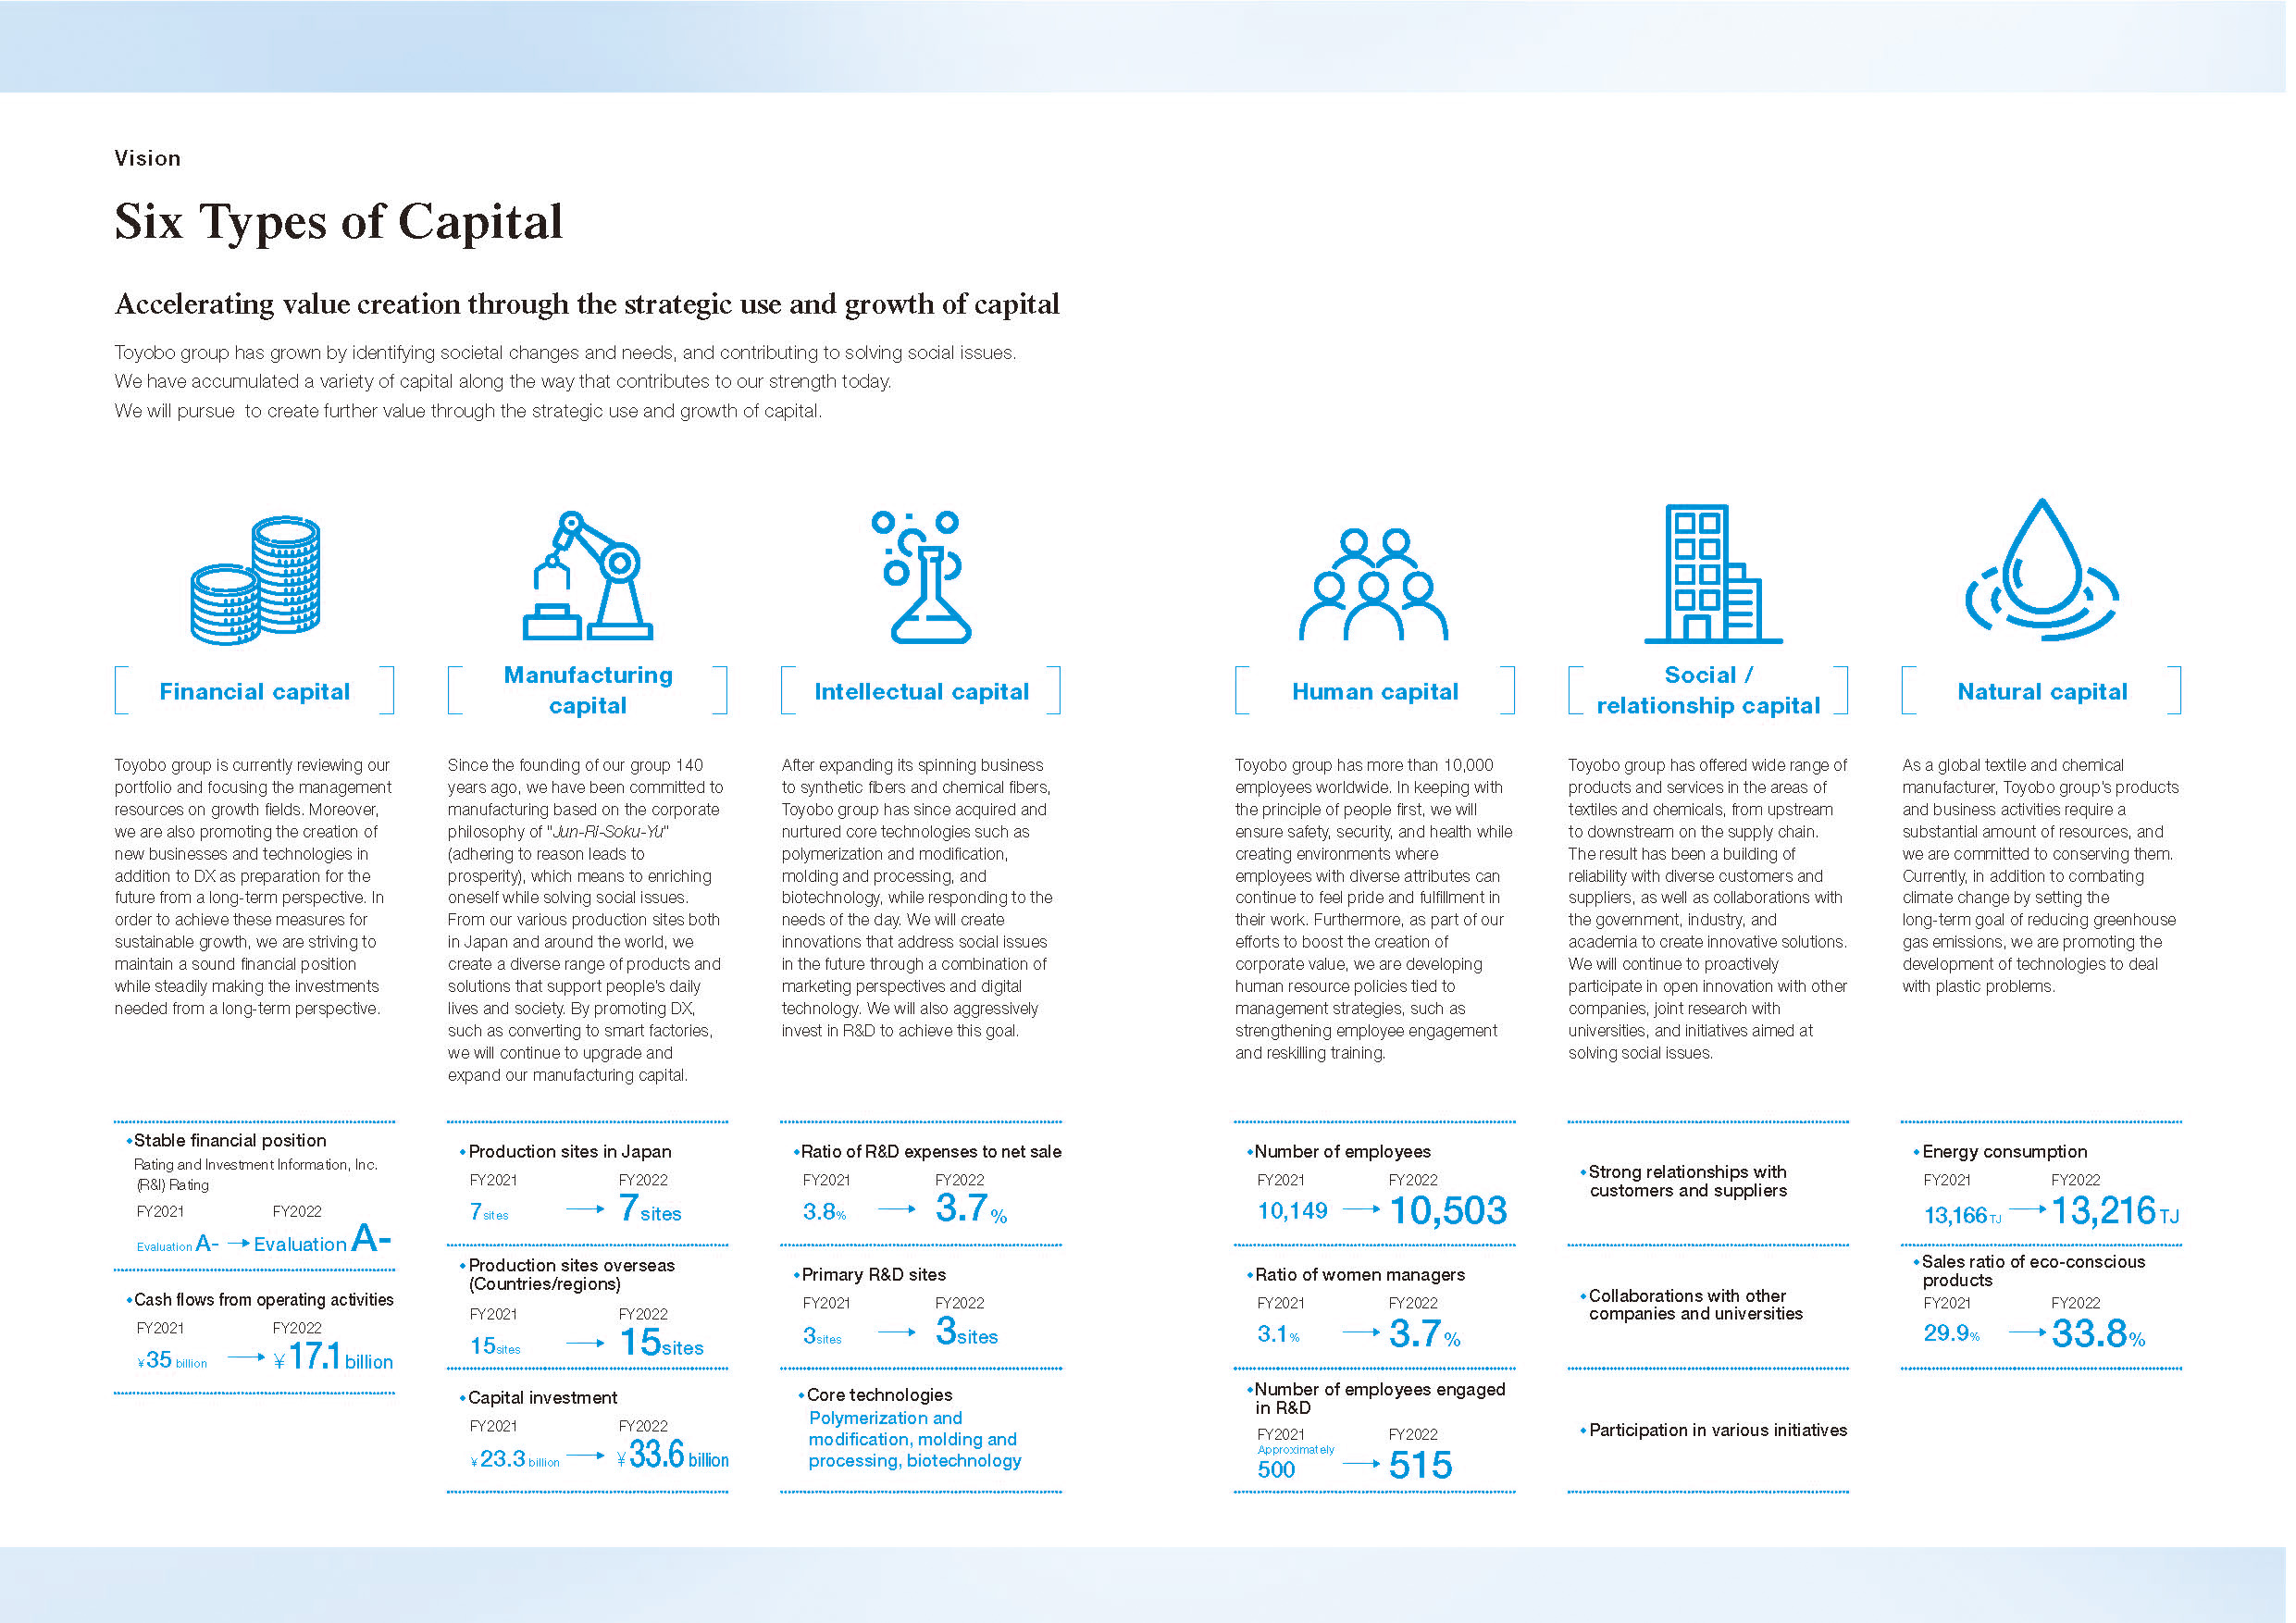 Six Types of Capital in the Integrate Report 2022